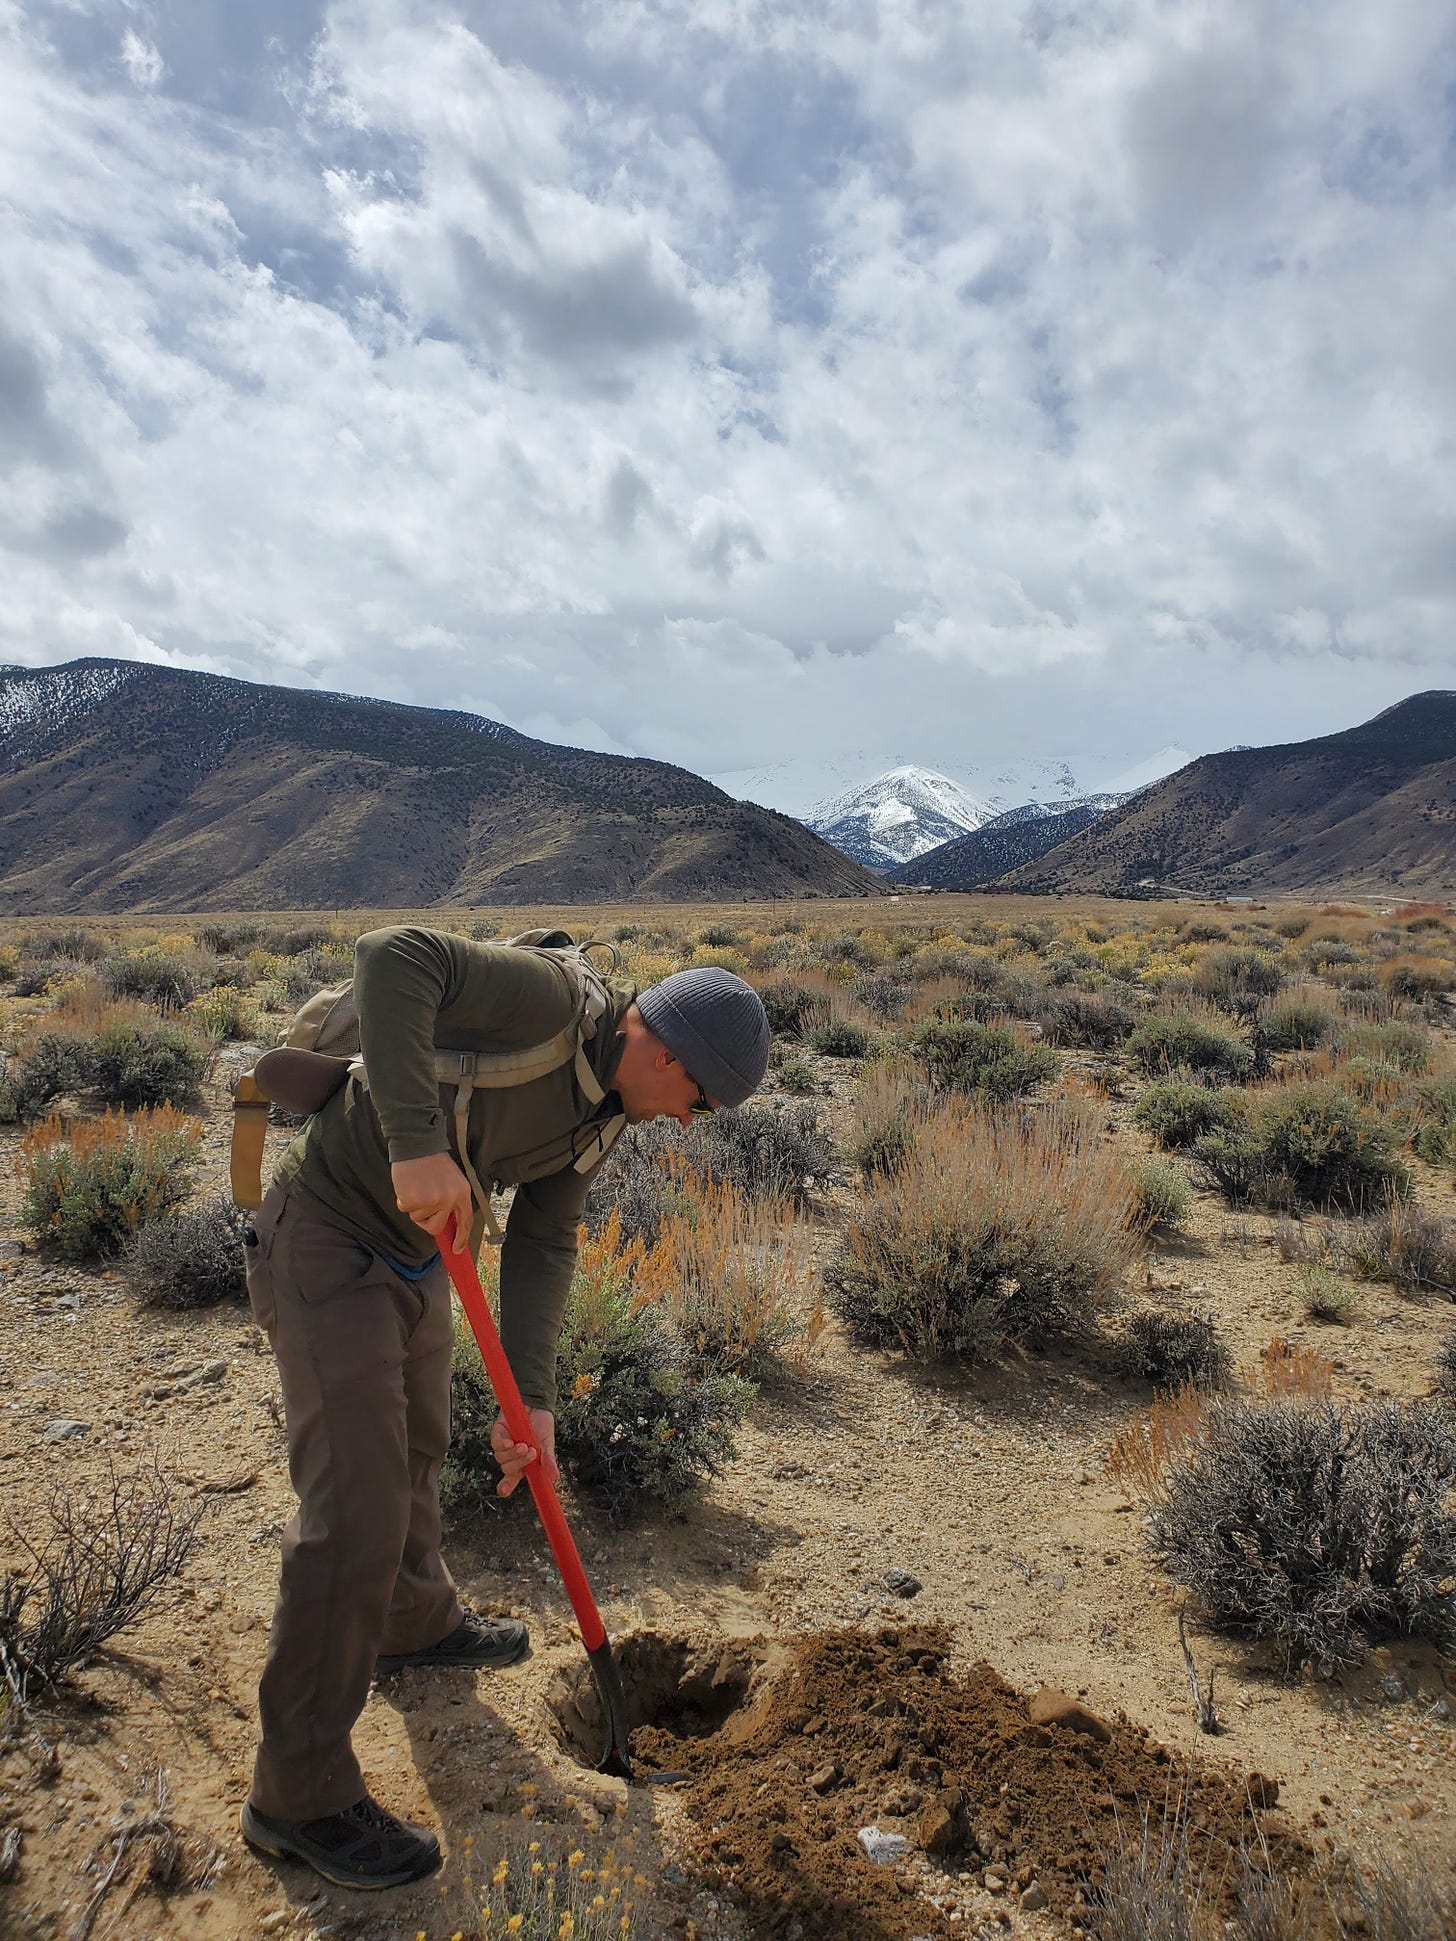 Eric digging in the ground with a shovel. Hills and White Mountains in distance behind him.